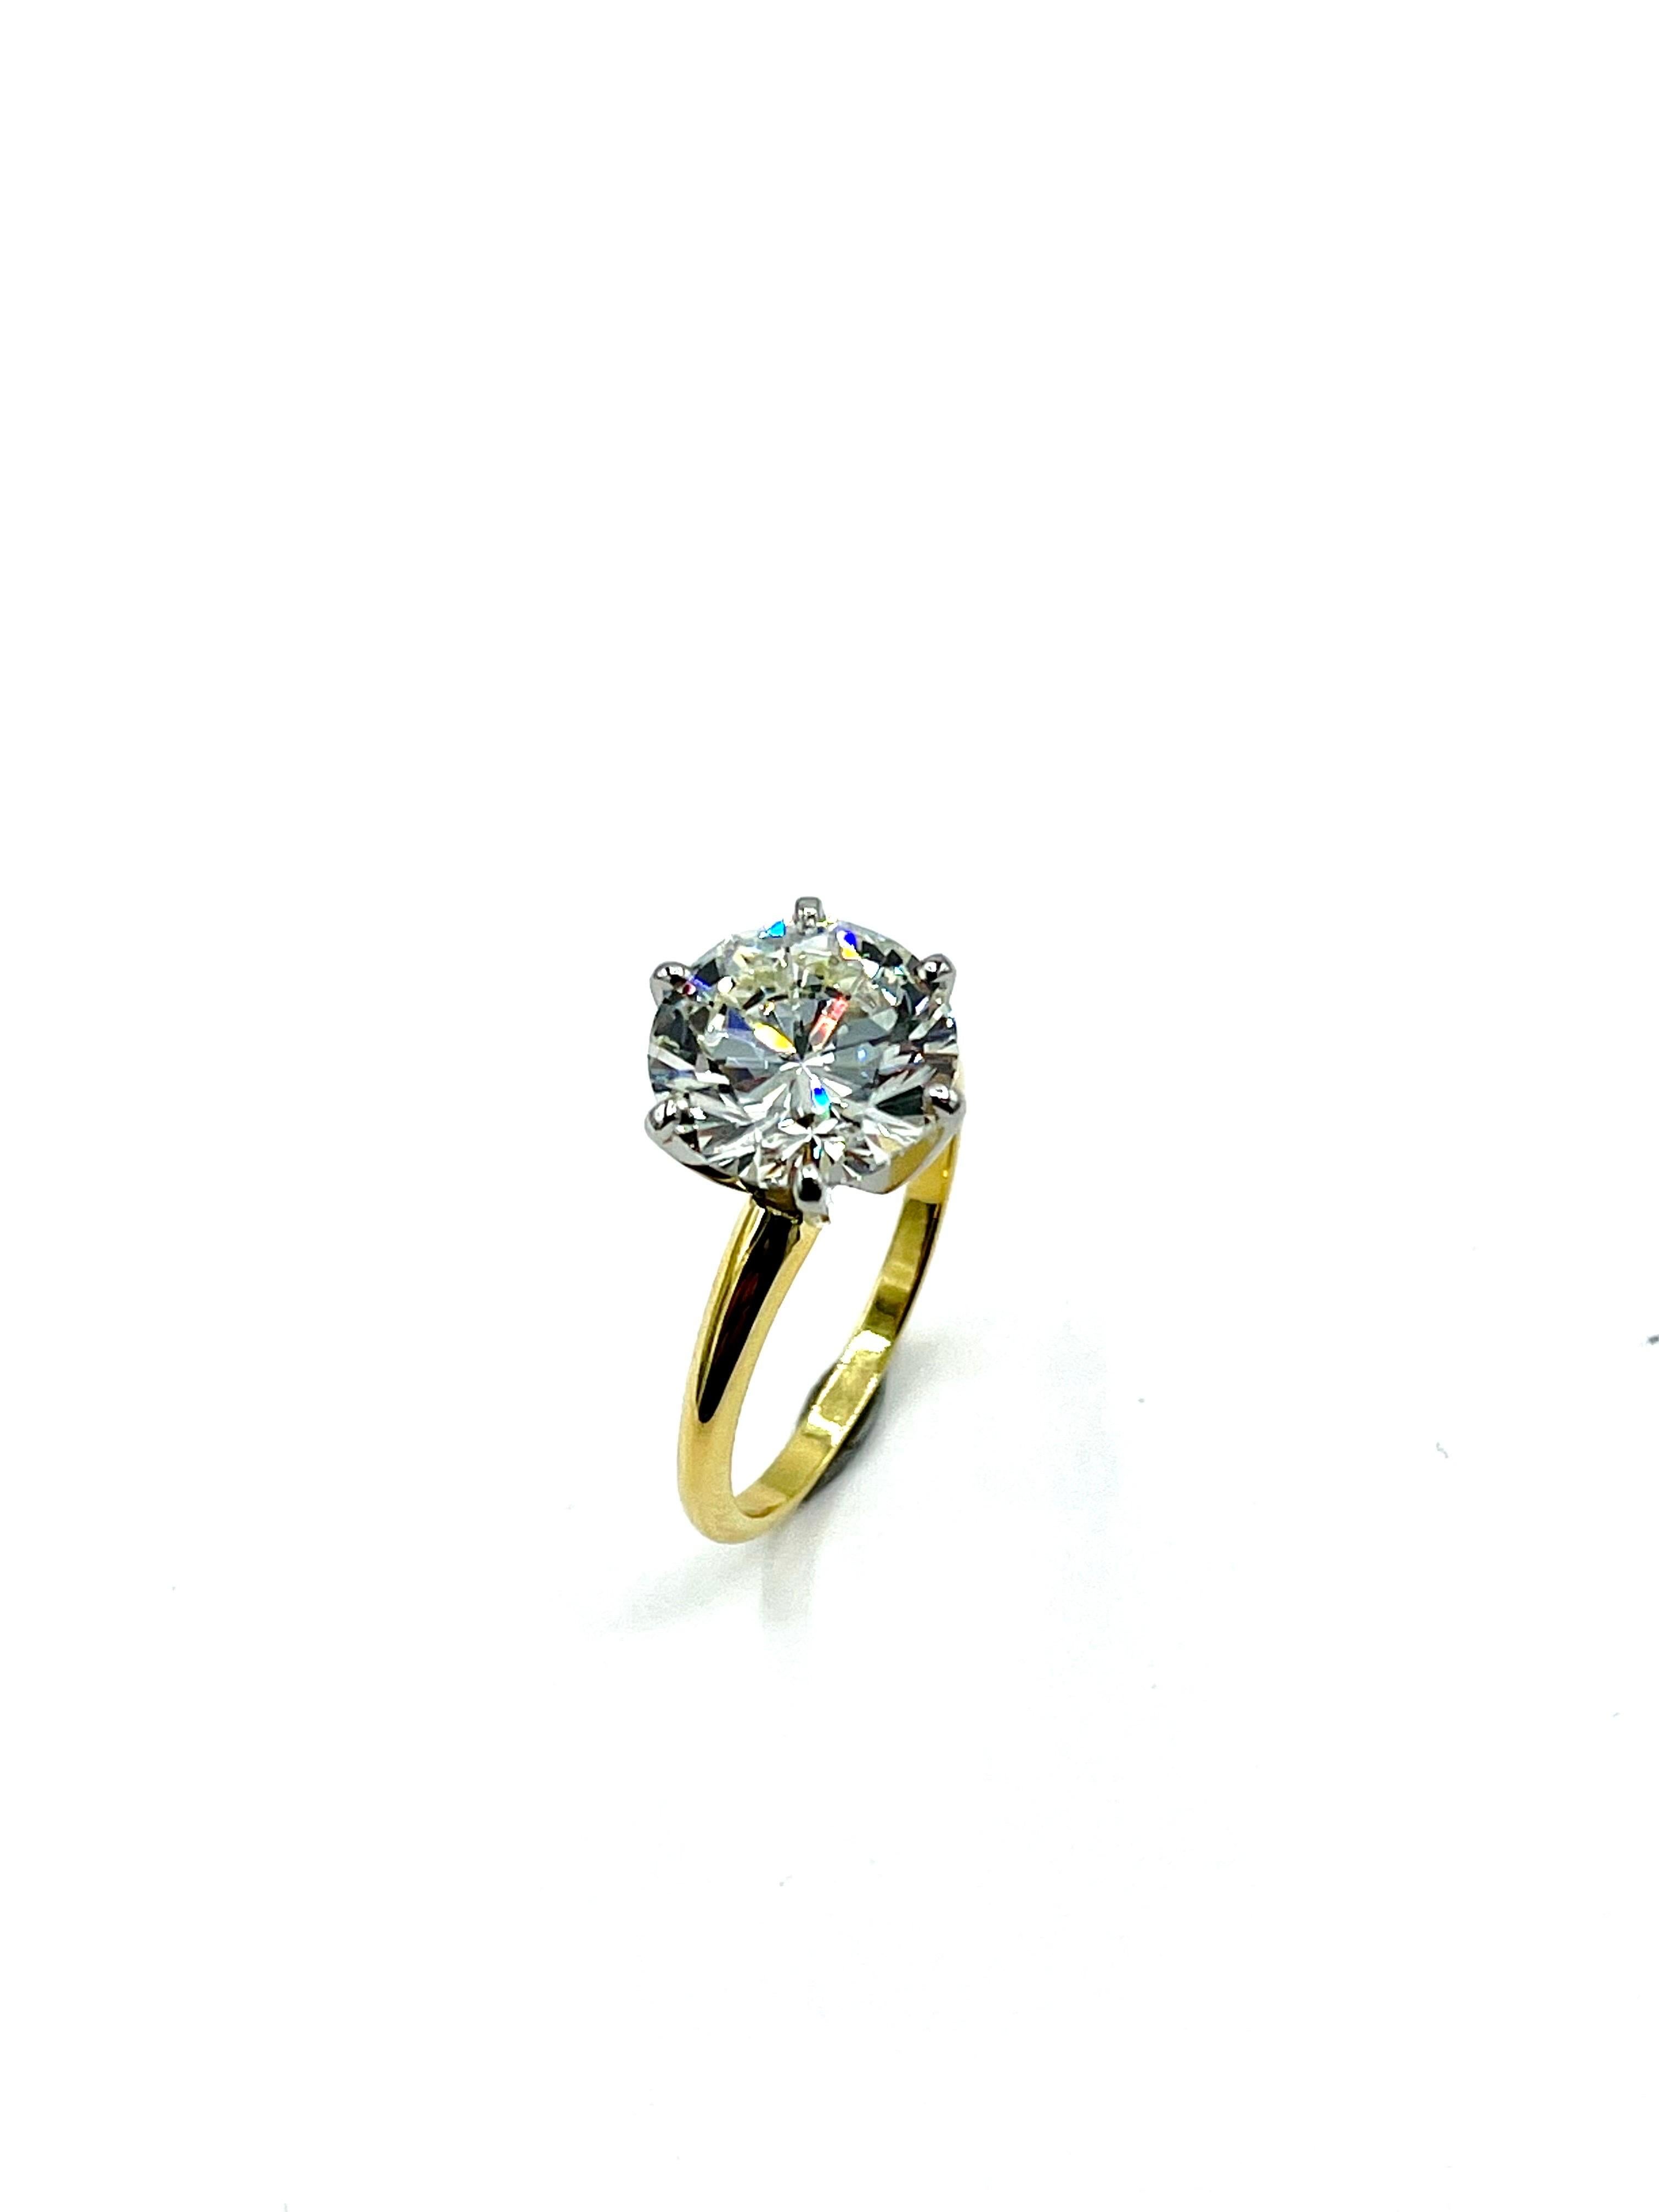 An absolutely stunning round brilliant Diamond solitaire ring.  The Diamond is set in a platinum six prong head on an 18k yellow gold shank.  The Diamond is graded as a J color, SI2 clarity by GIA report number 1226479851, and has excellent fire and